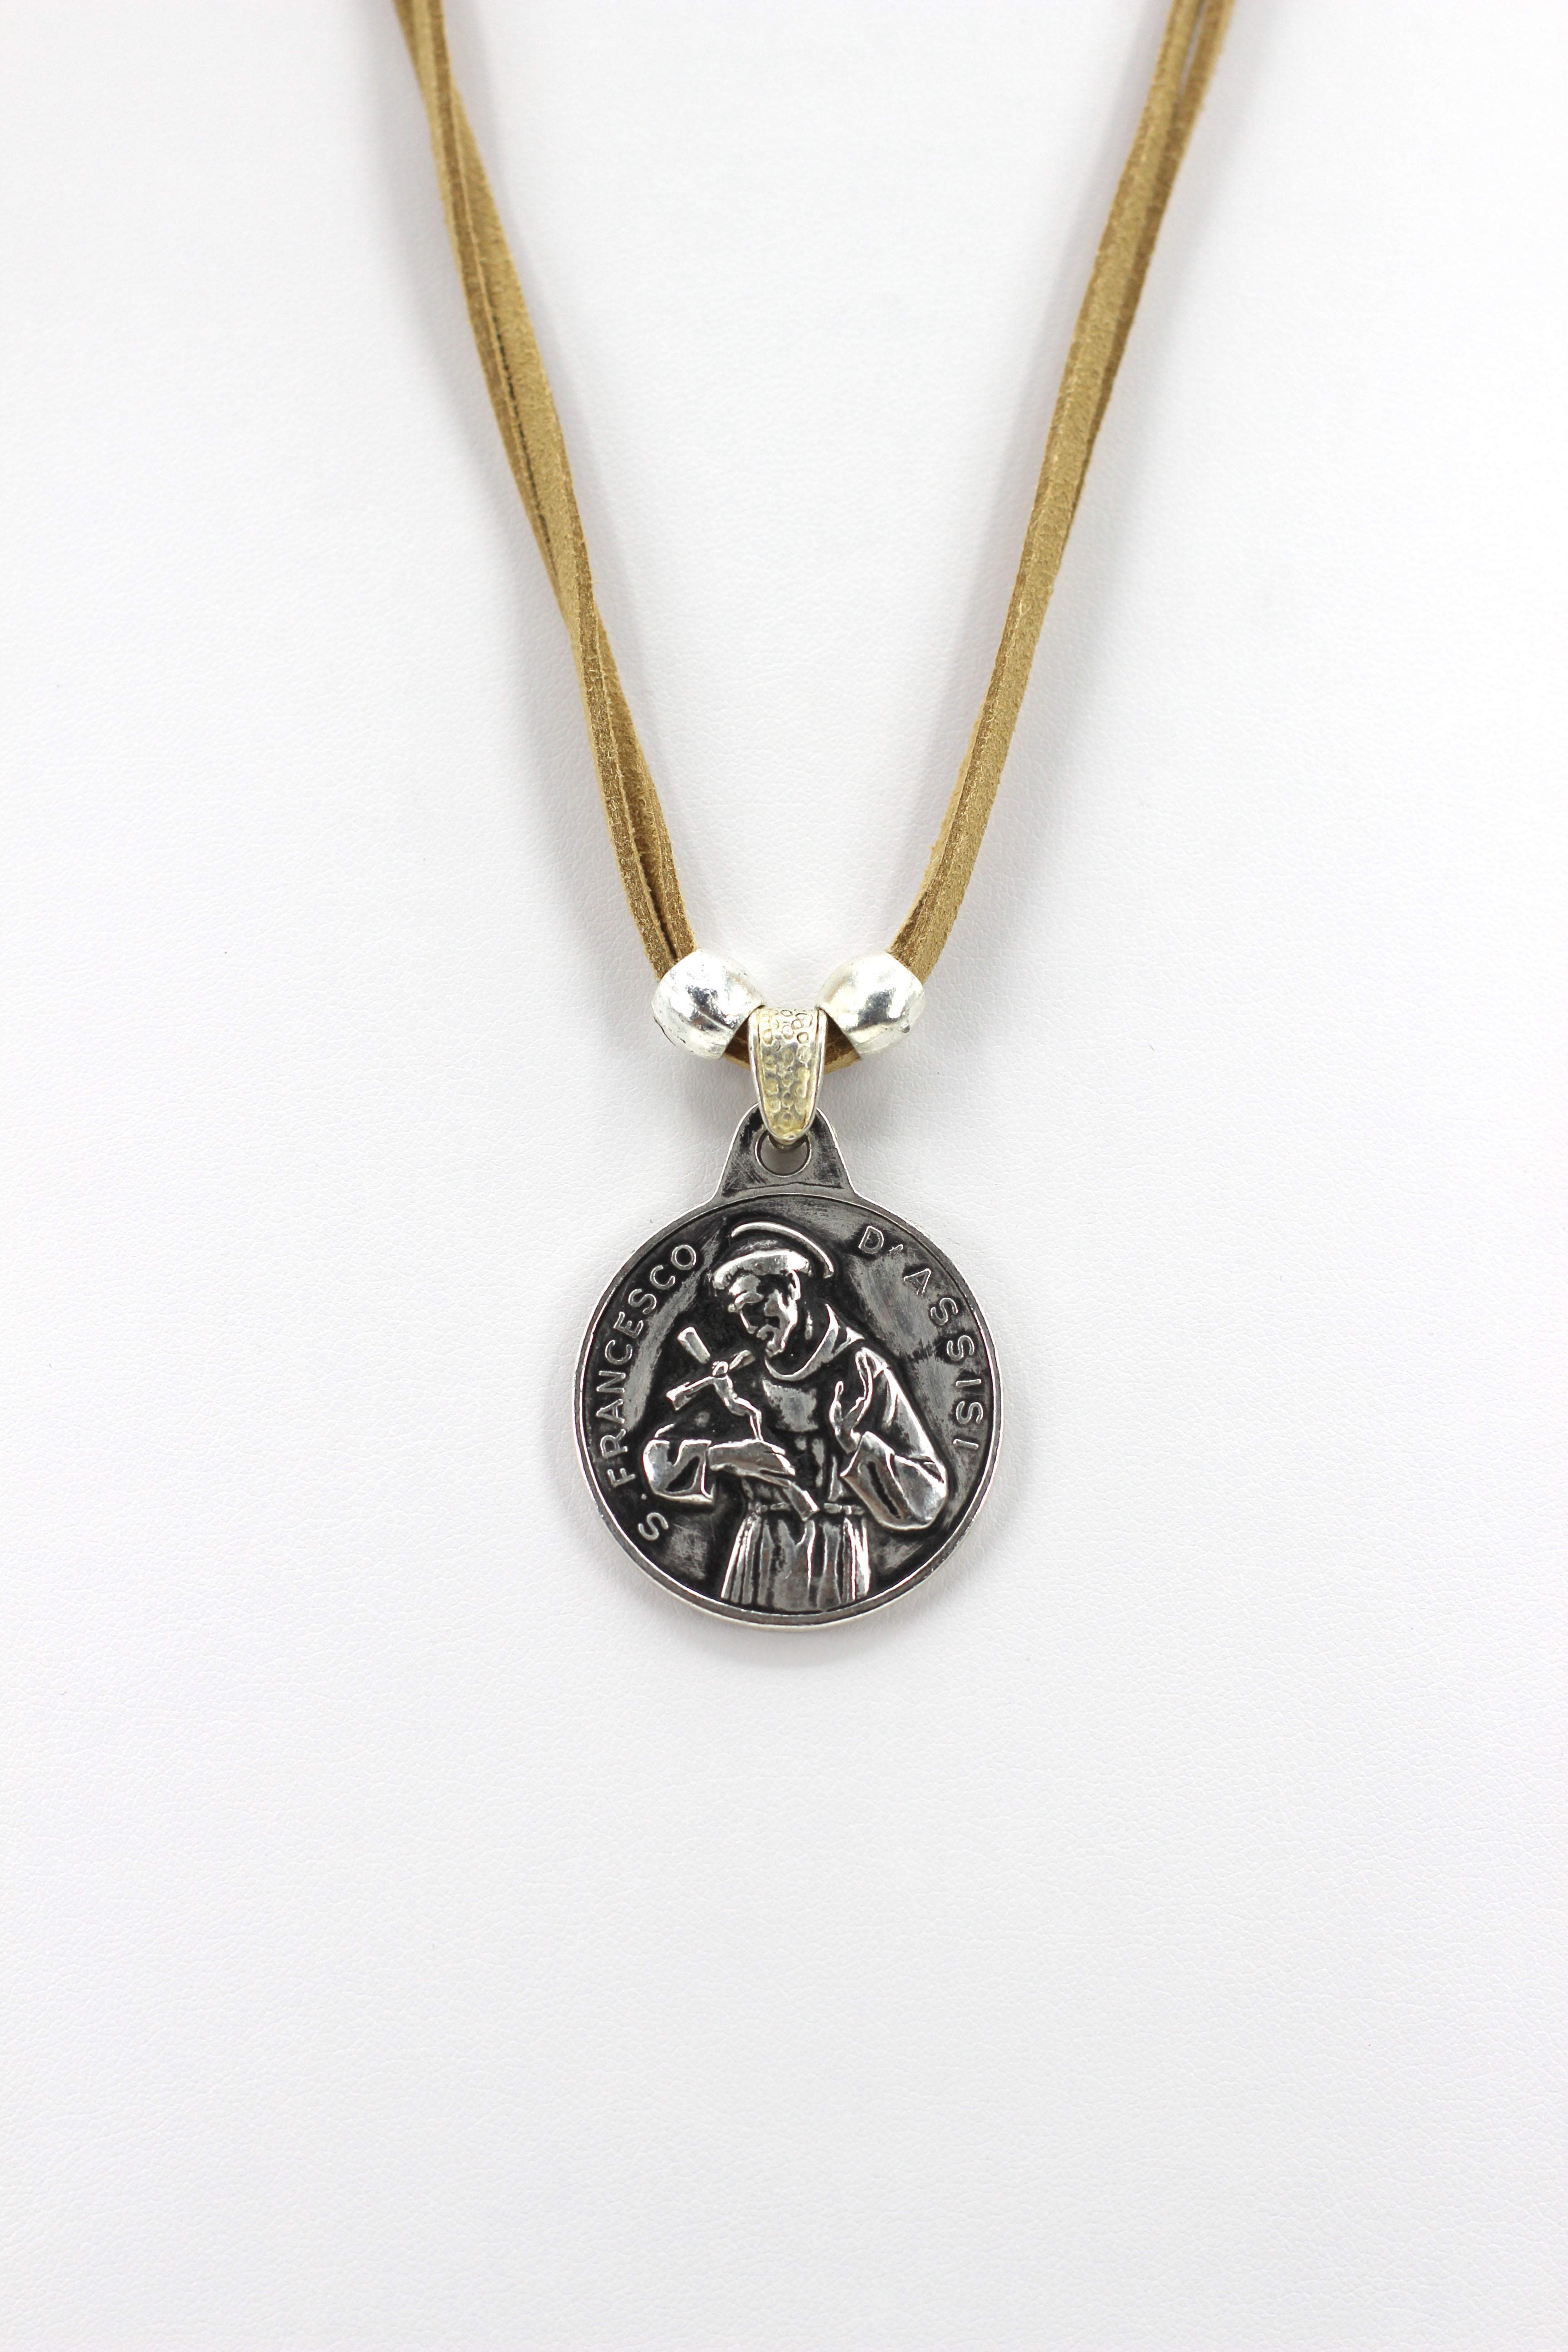 Vintage Necklace of Saint Francis of Assisi Handmade Jewelry with Genuine Leather strap by Graciela's Collection